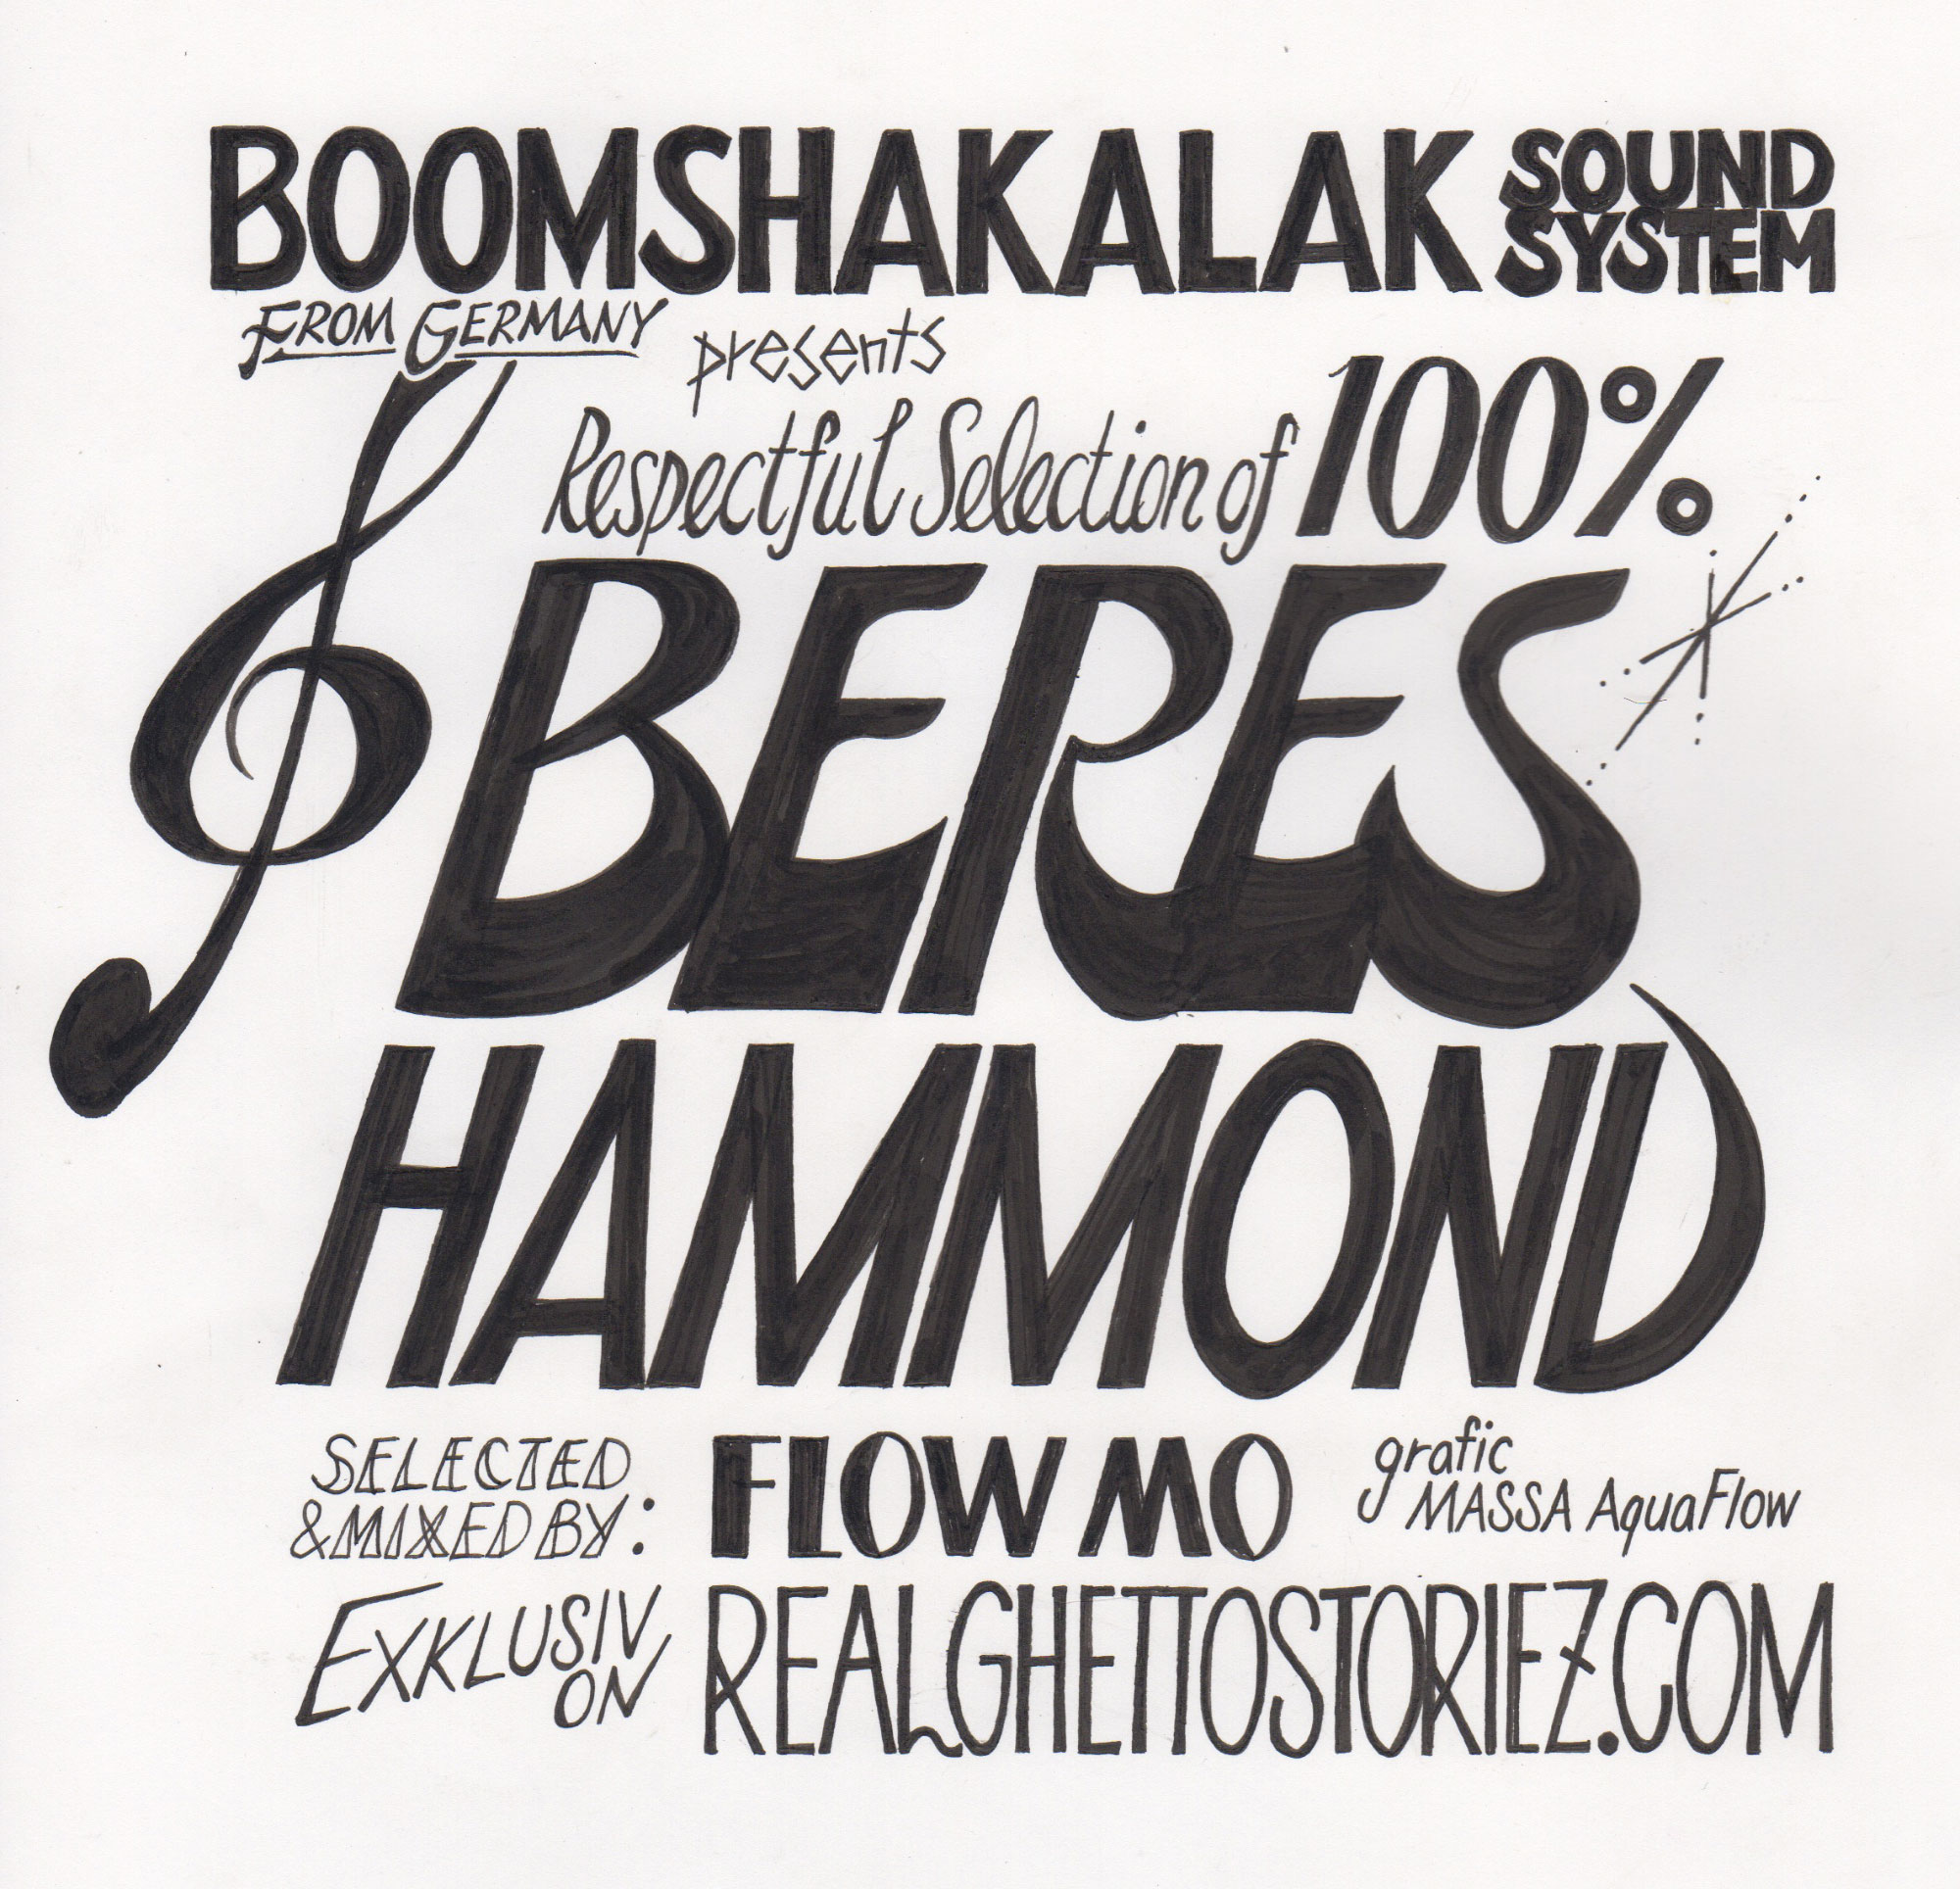 100% Beres Hammond (Respectful Selection by Flowmo from Boomshakalak Sound System, Germany)